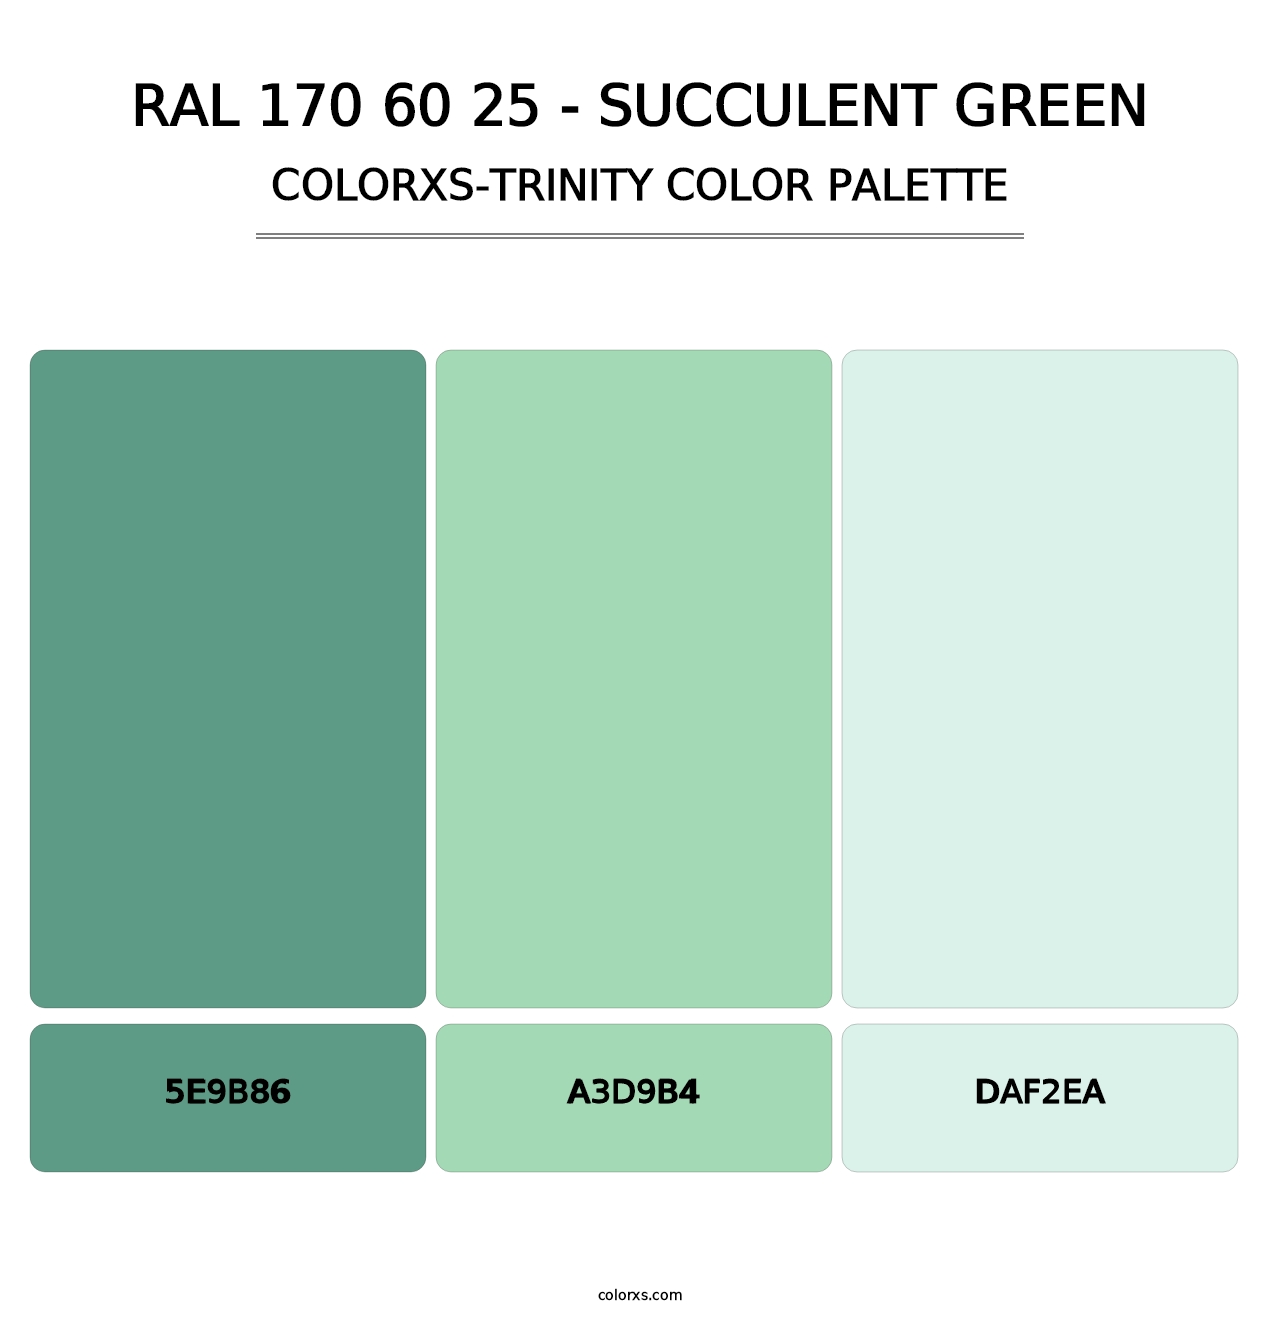 RAL 170 60 25 - Succulent Green - Colorxs Trinity Palette